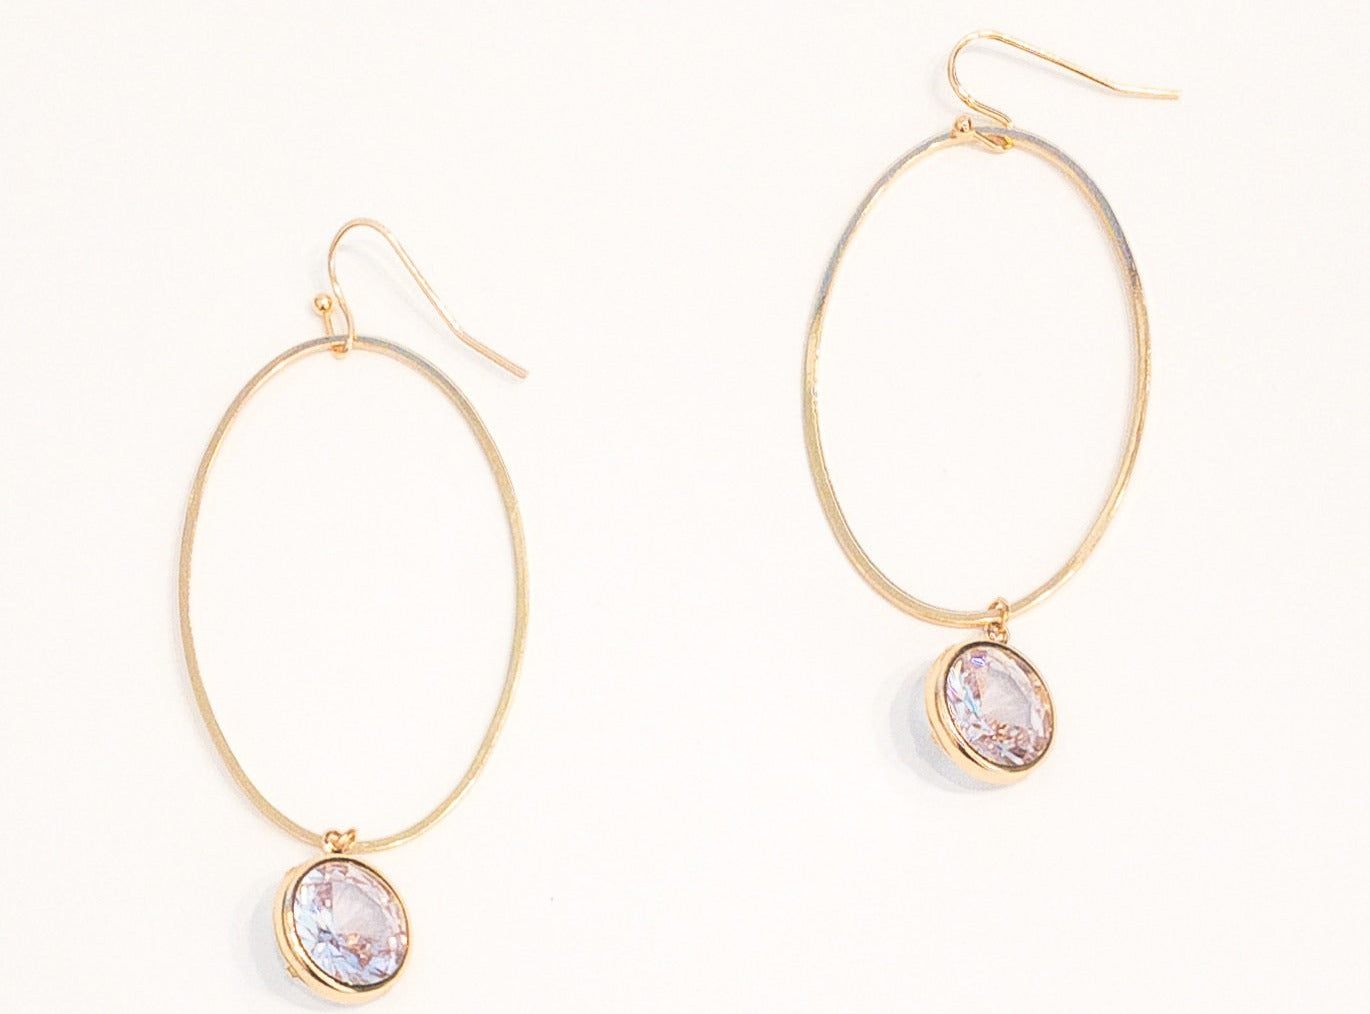 Gold plated Dangly hoop earrings Sparkly crystal accent Length : 2 1/2"